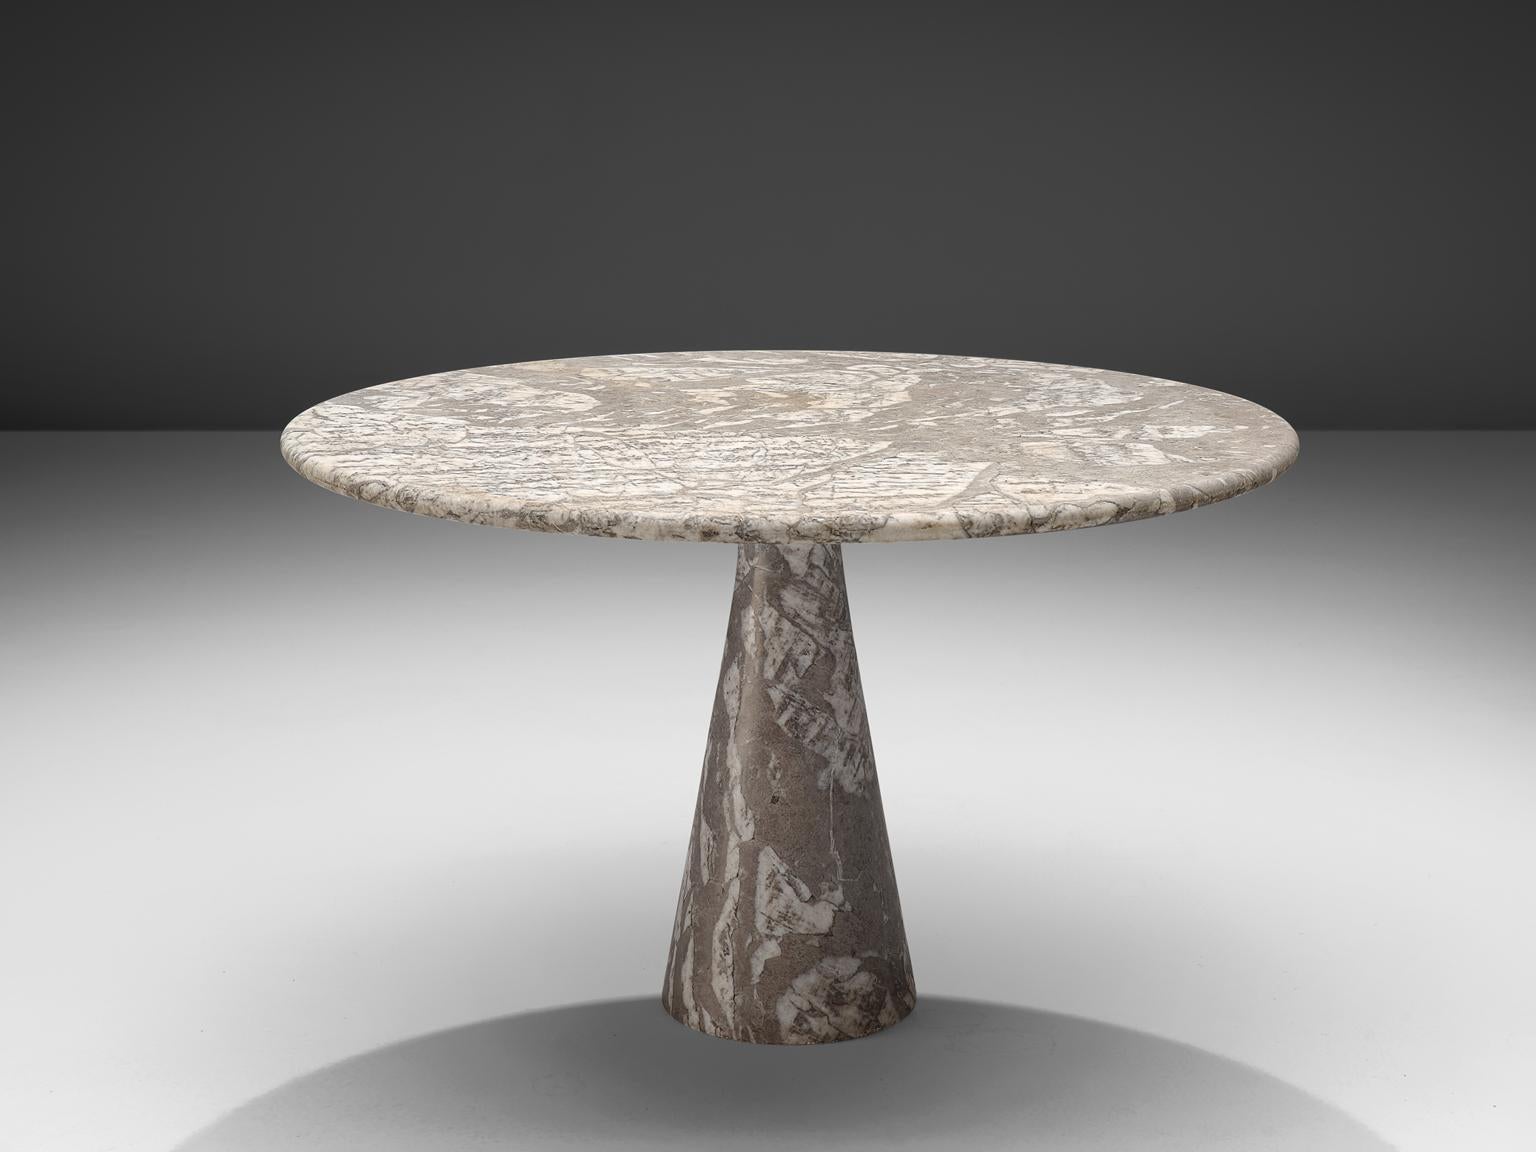 Angelo Mangiarotti, pedestal table, marble, Italy, 1970s

This patterned grey to white table is designed by Italian Angelo Mangiarotti. The circular top rests perfectly on the cone. The design showcases a play of balance and rhythm. The design is